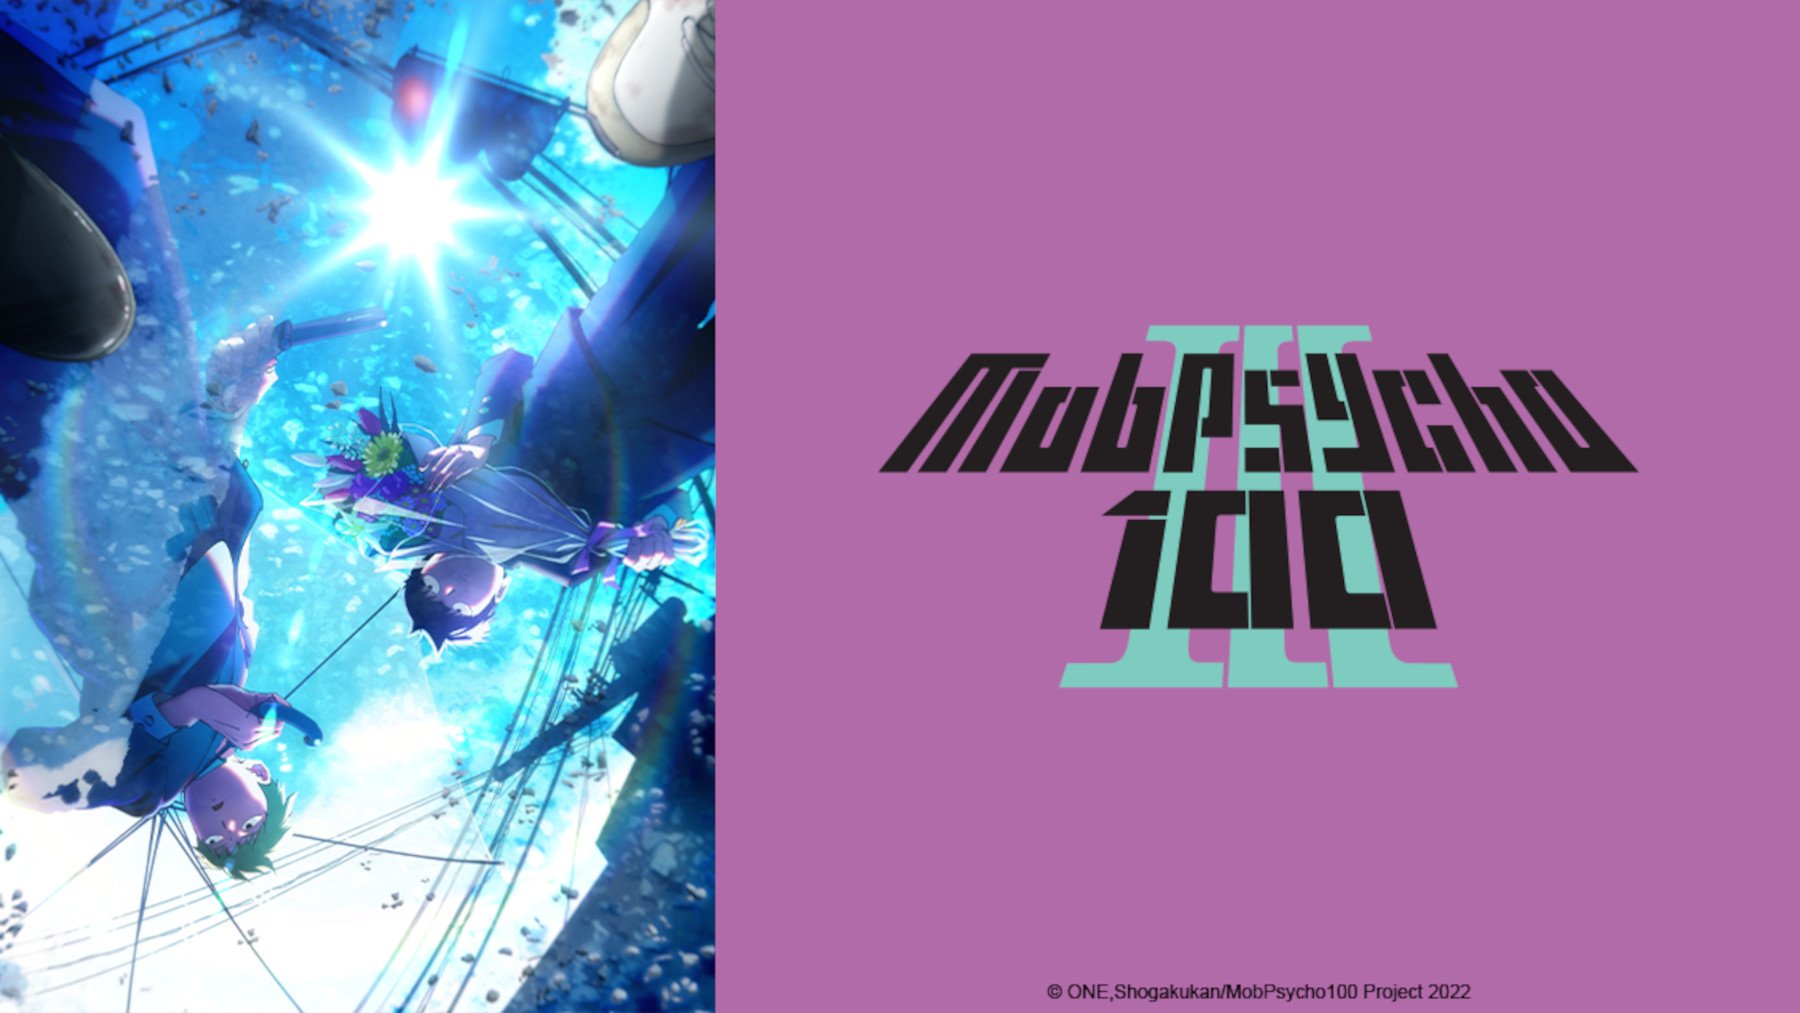 Key art for 'Mob Psycho 100' Season 3. It features the anime's logo on the right side and a poster with Mob and Regan on the left side.